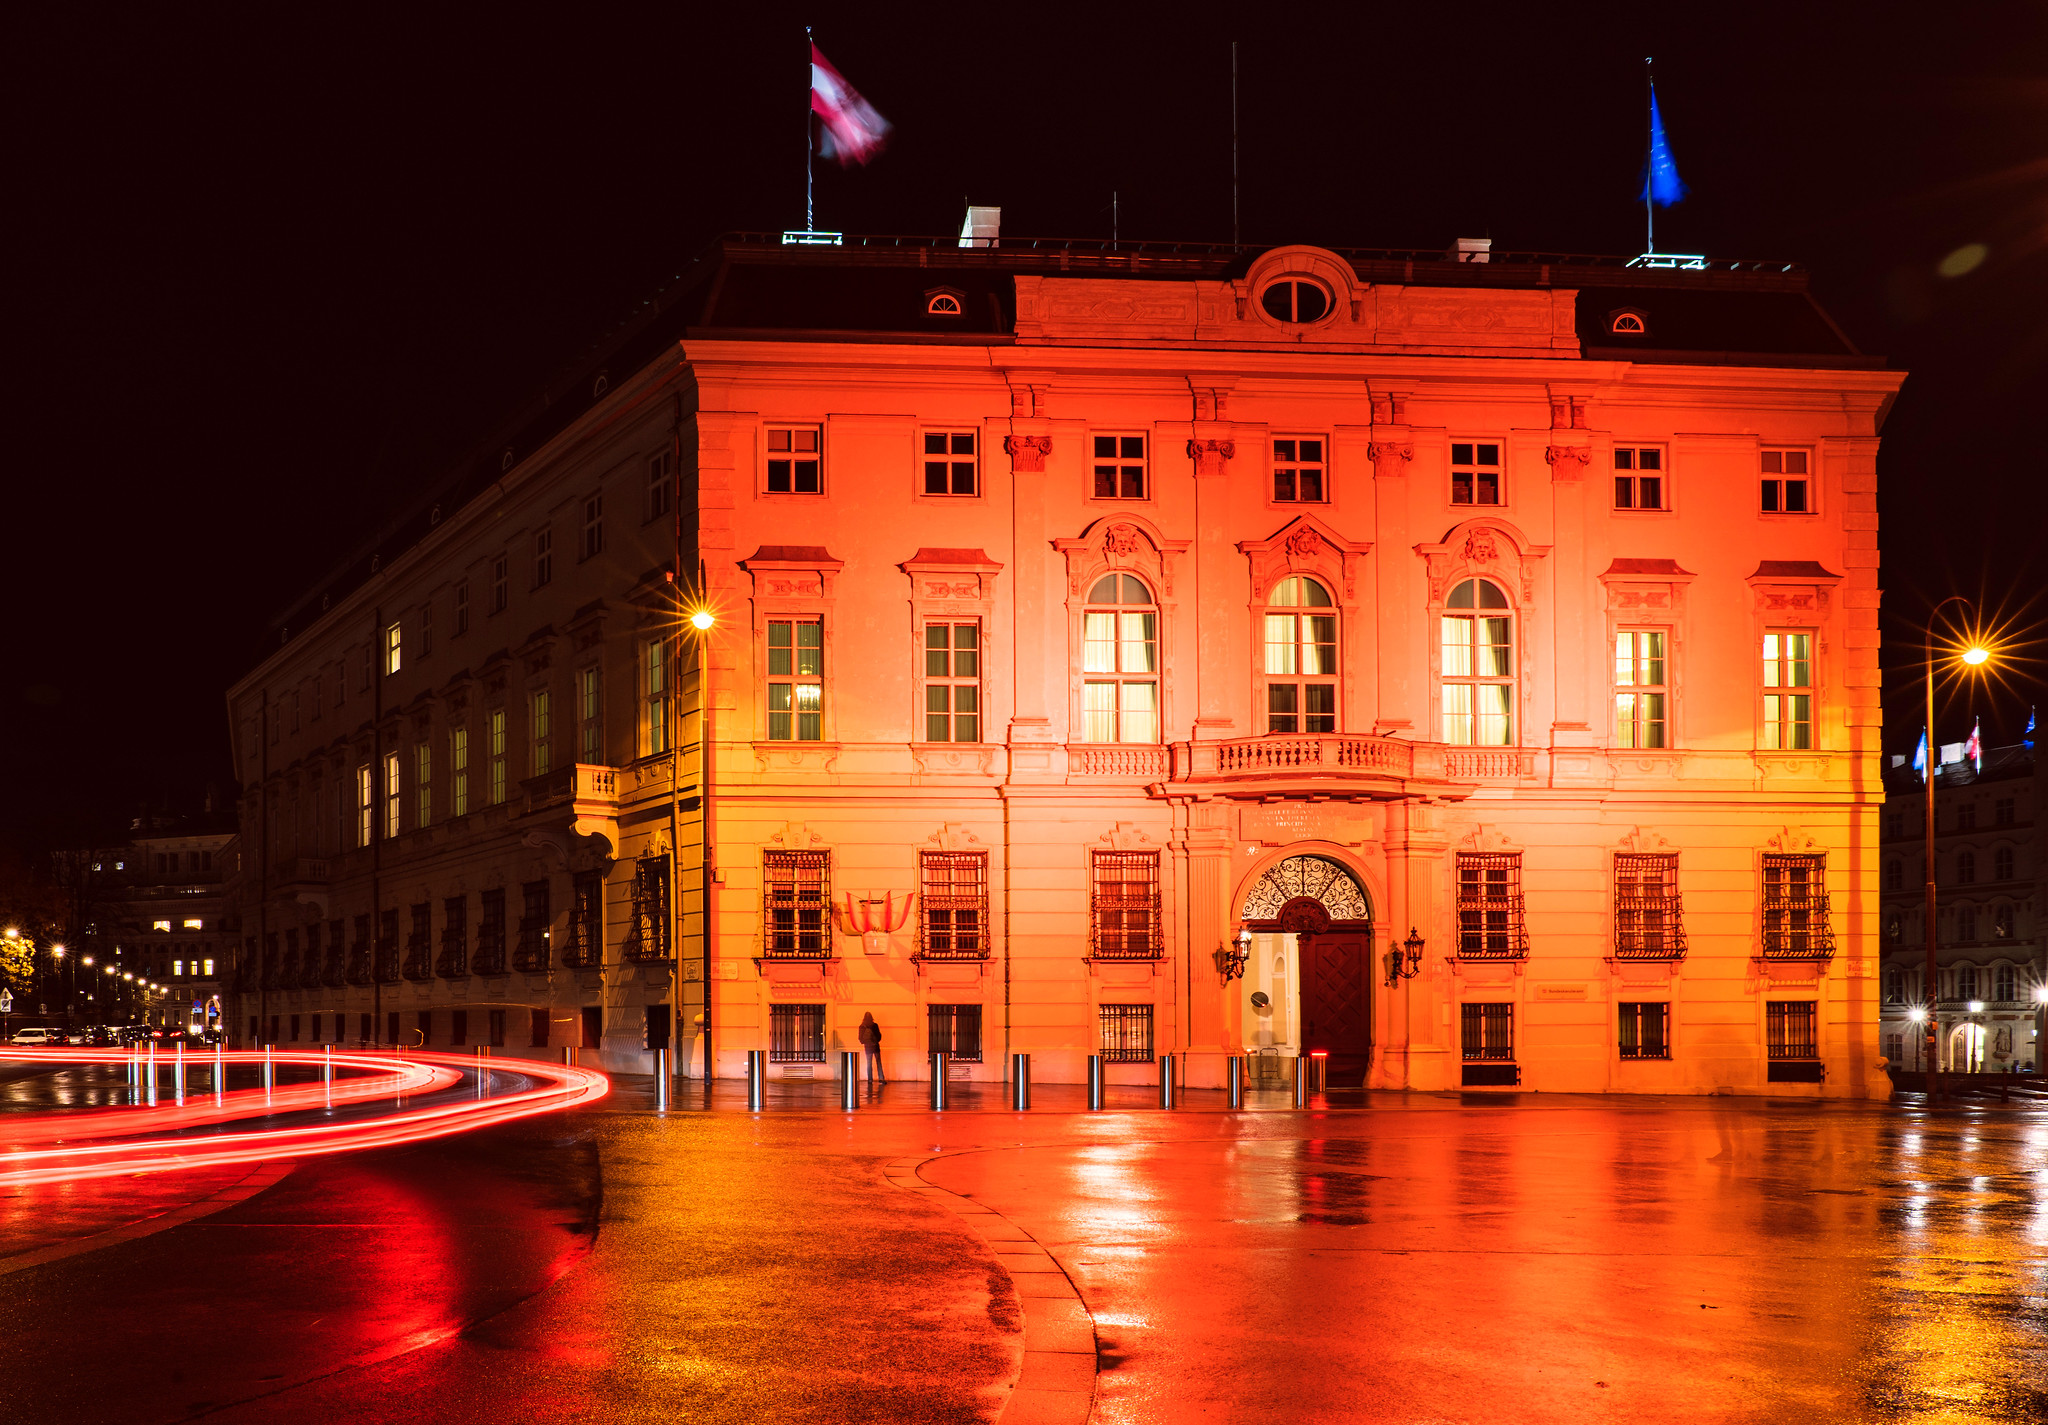 For the first time the Federal Chancellery of the Republic of Austria supported the #Orangetheworld campaign. Photo: BKMC/Eugenie Sophie